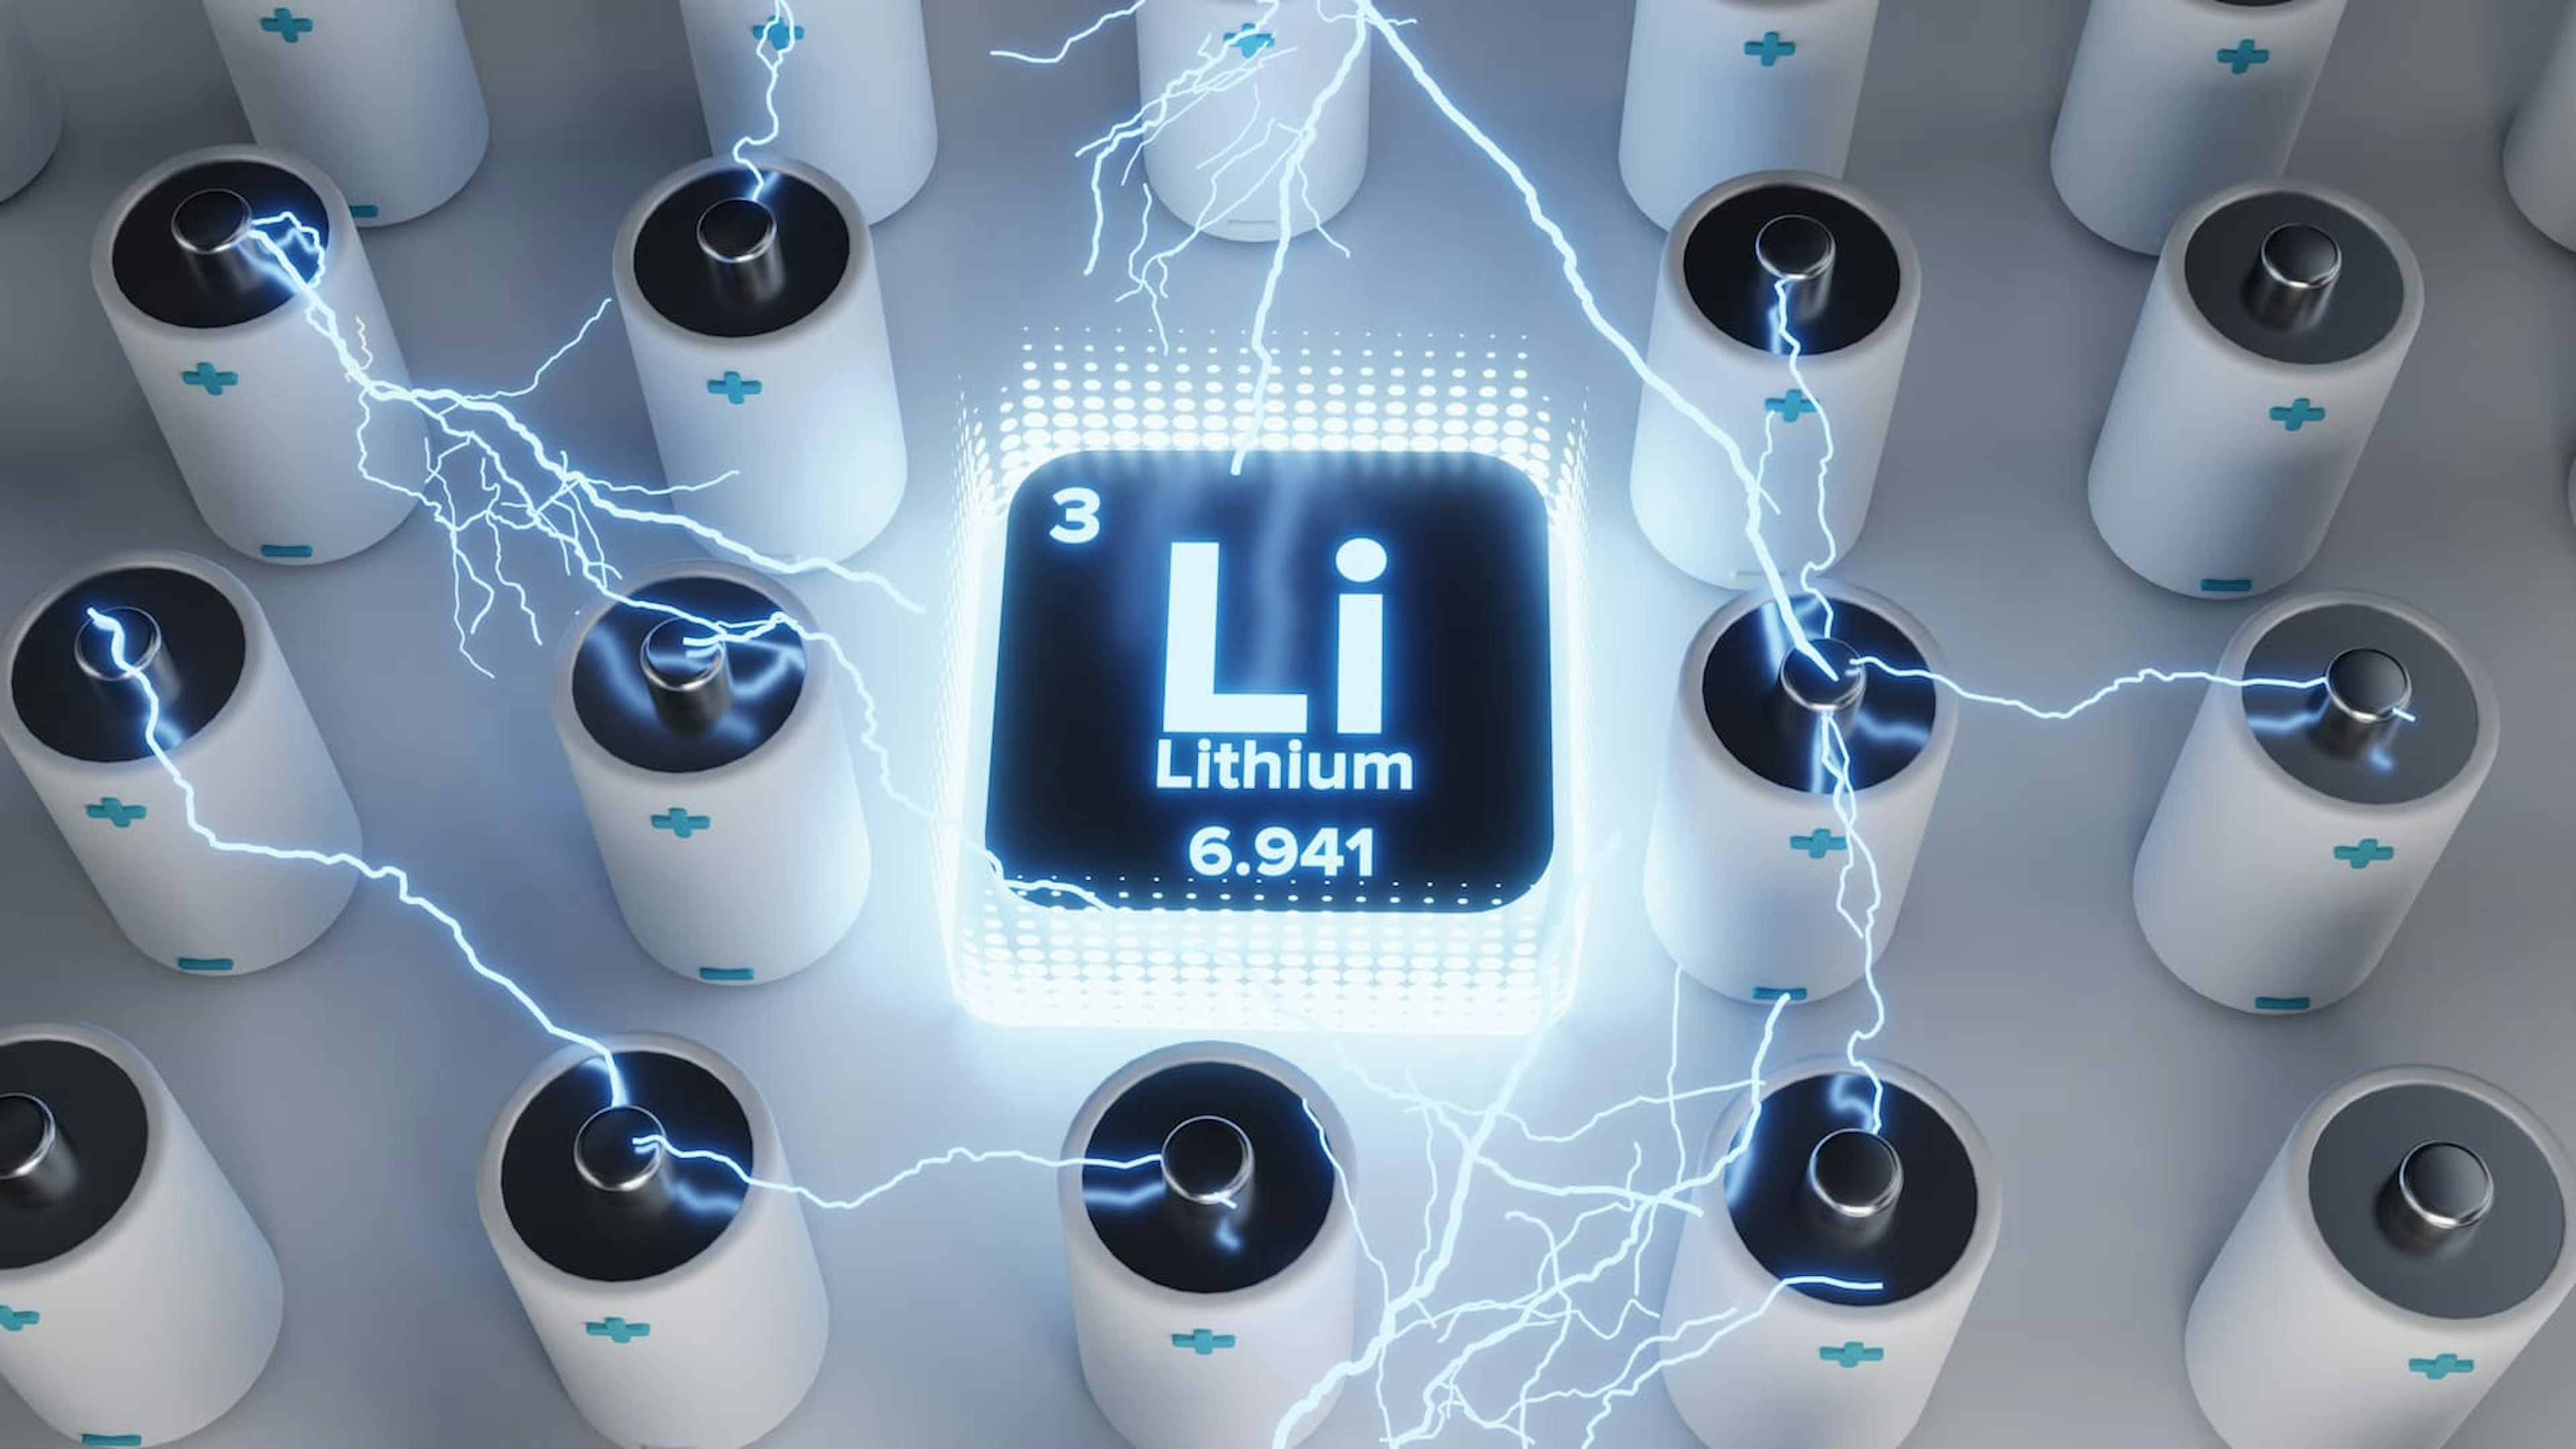 Lithium symbol on solid state lithium-ion batteries used as renewal source of energy